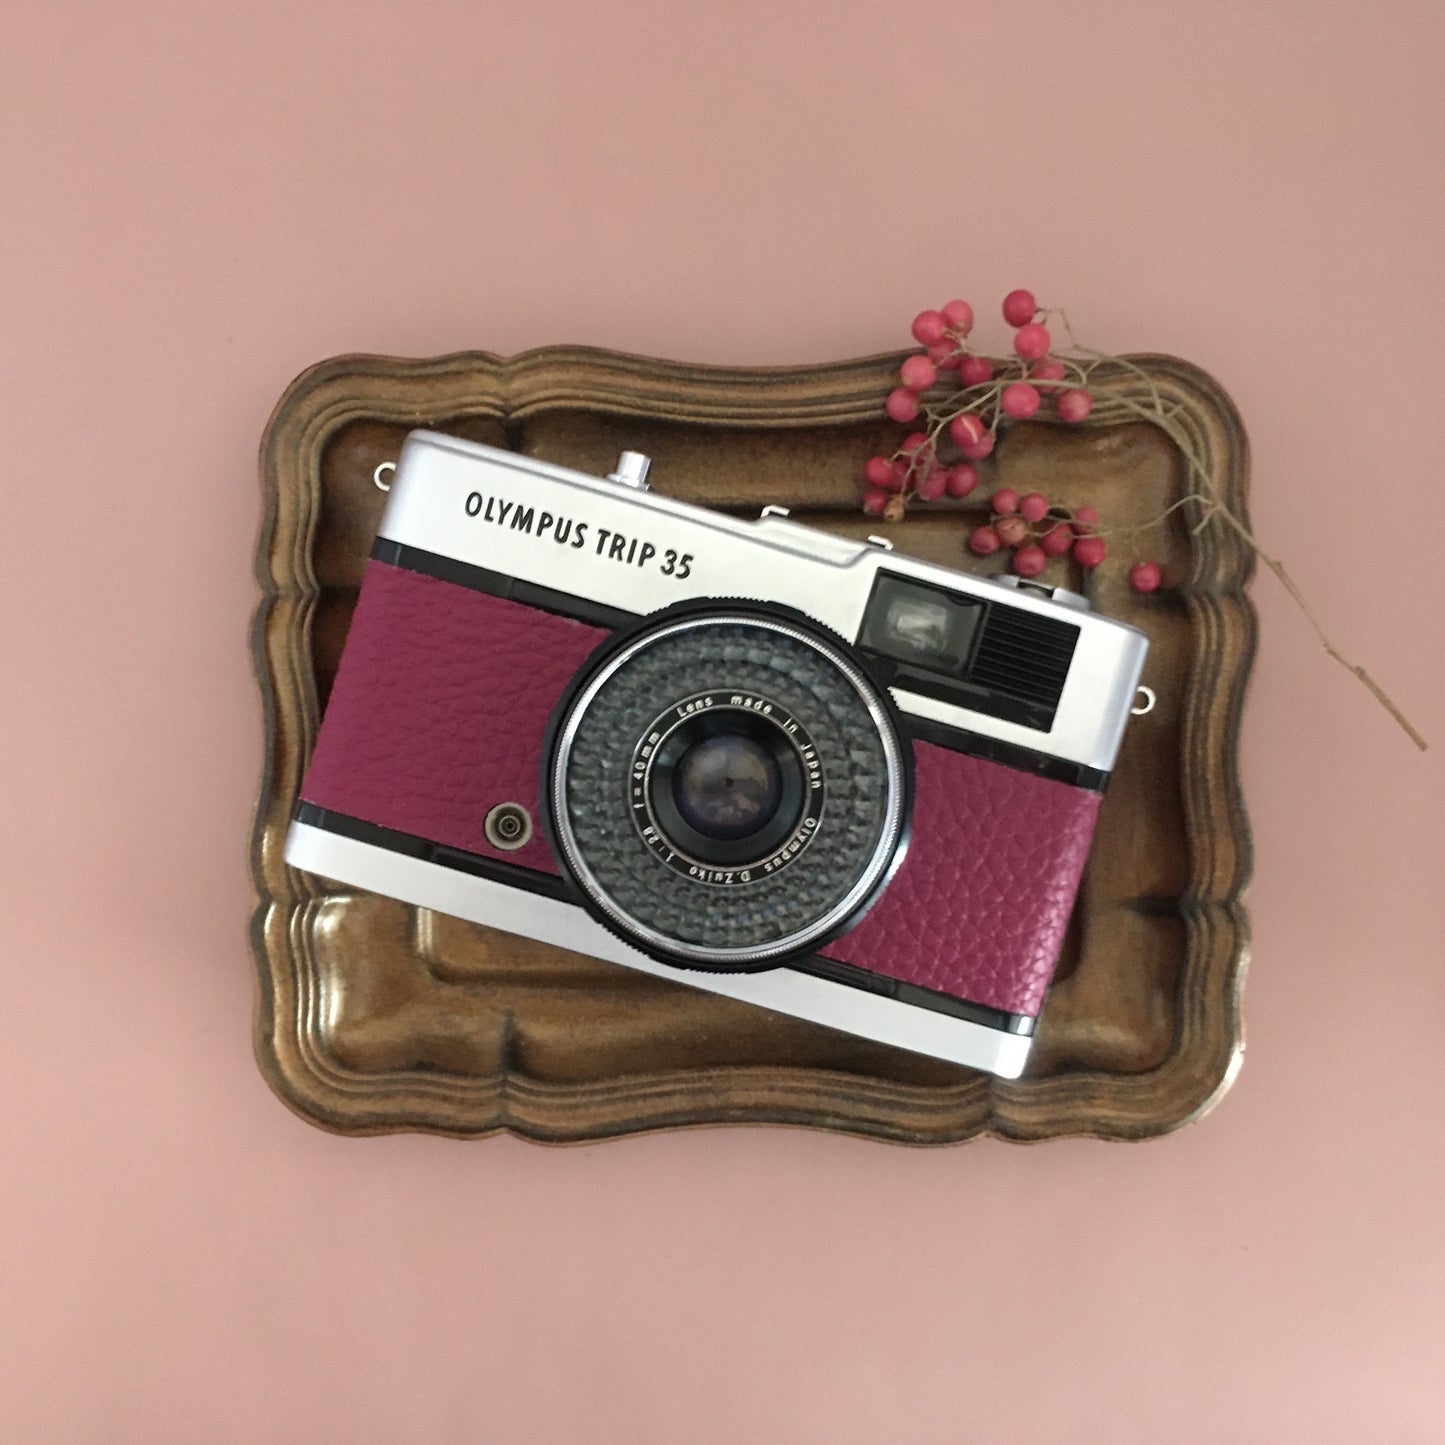 Olympus TRIP35 with raspberry leather